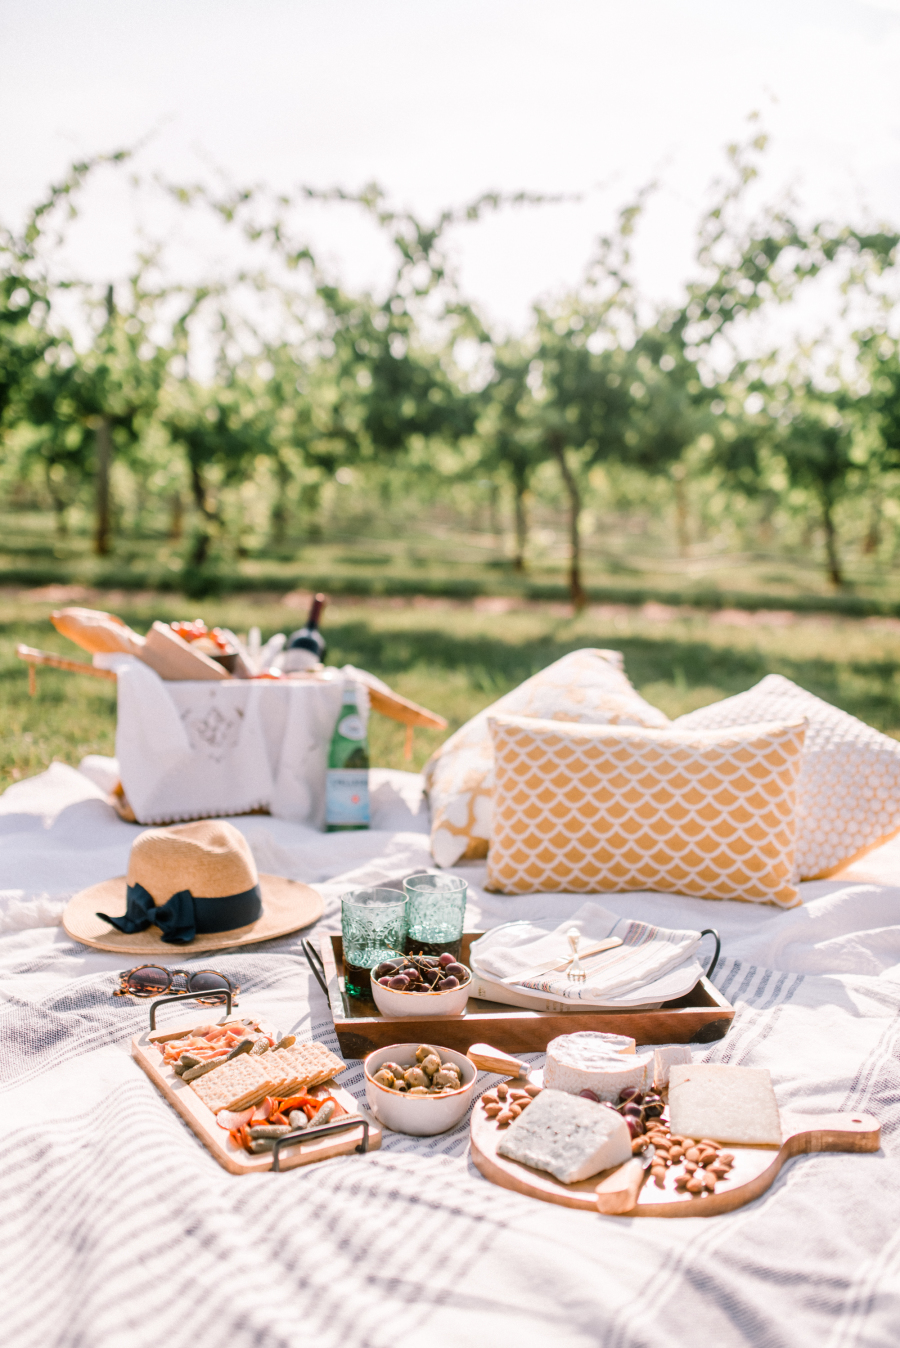 13 Aesthetic Picnic Ideas for a Picture-Perfect Gathering